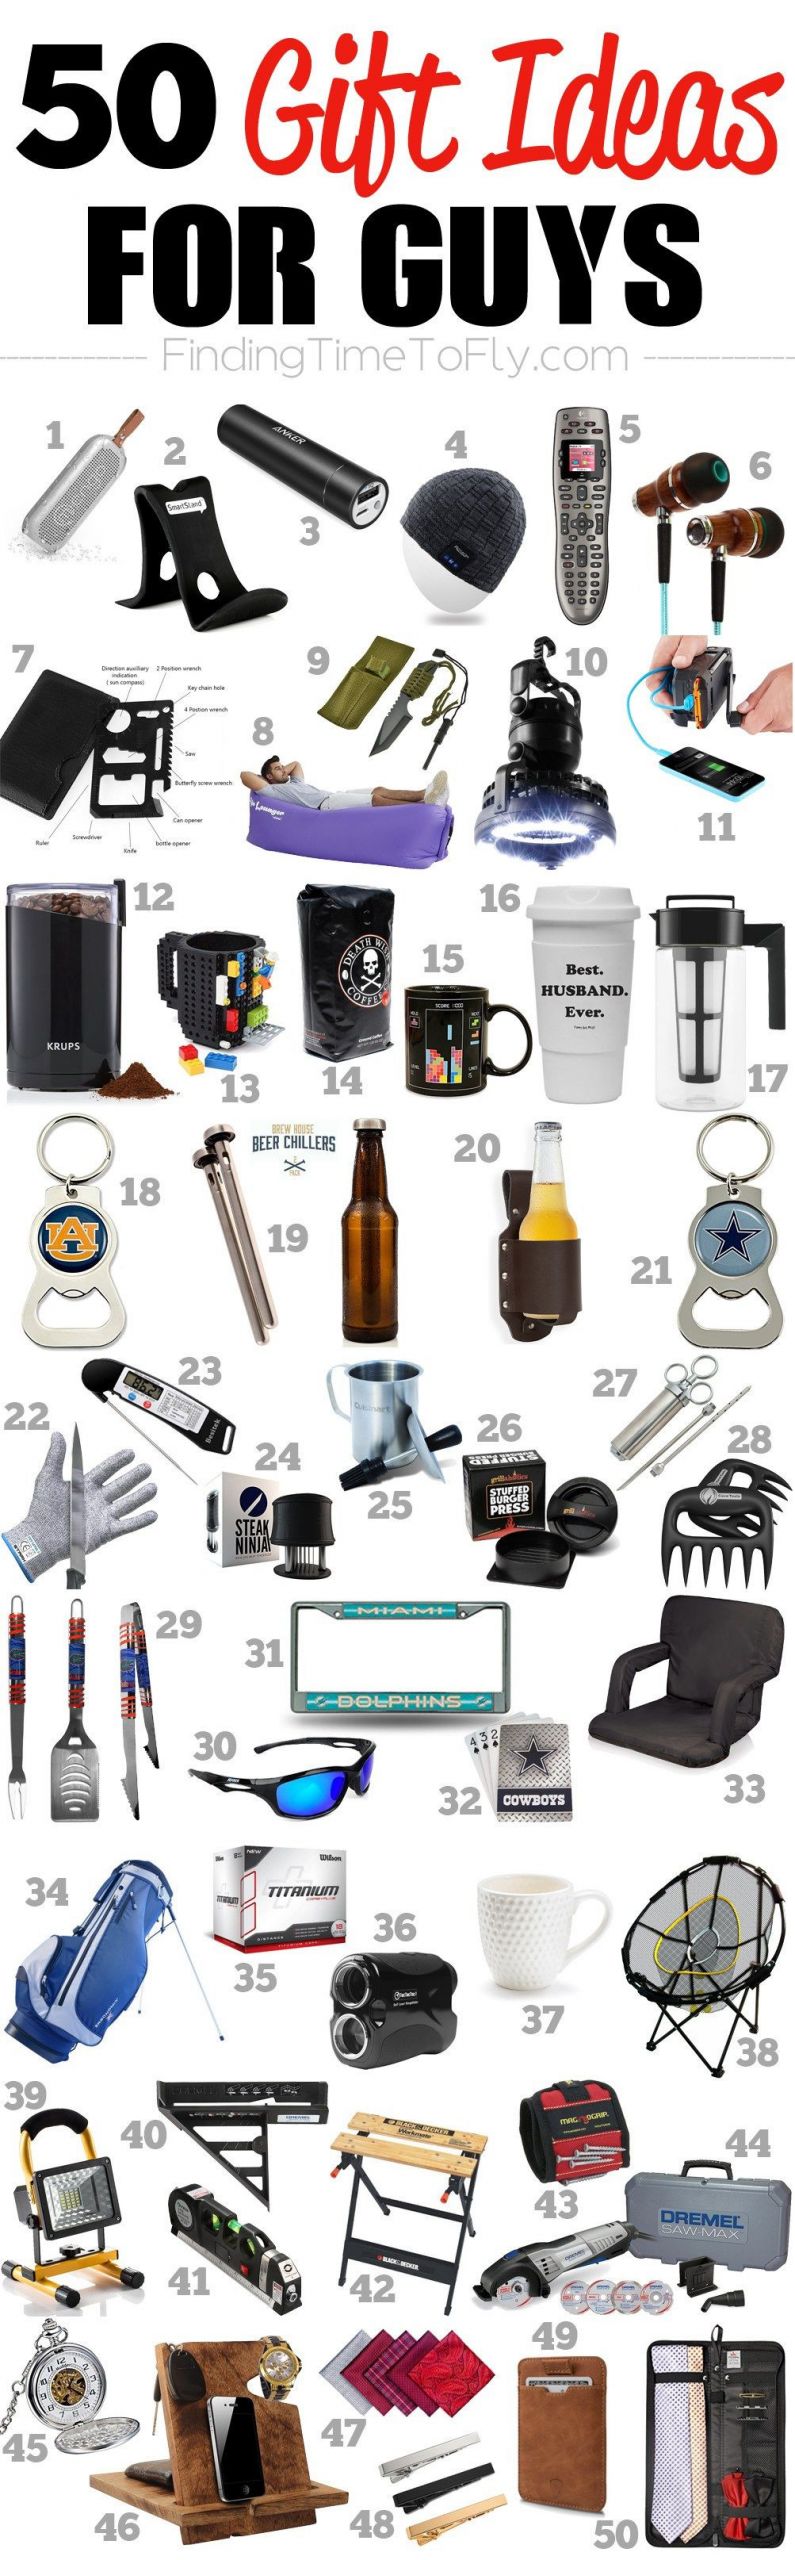 Graduation Gift Ideas For Men
 50 Gifts for Guys for Every Occasion